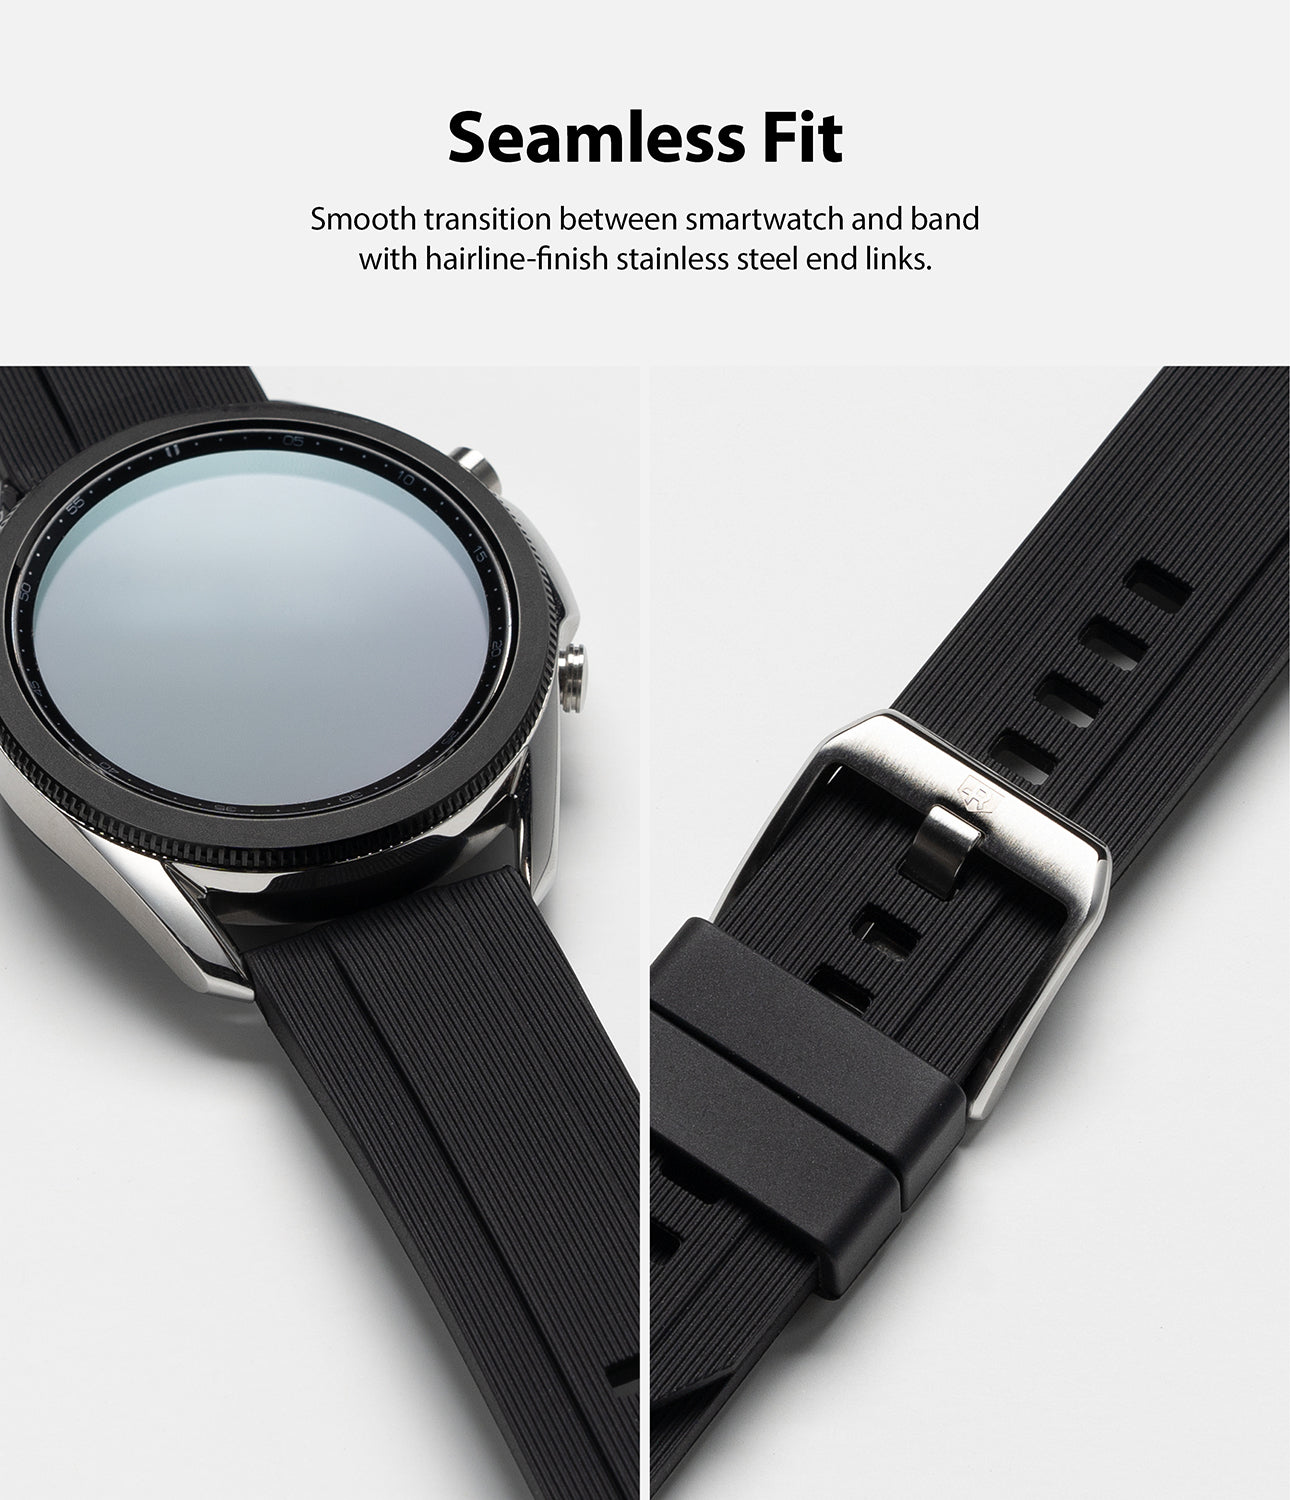 seamless fit - smooth transition between smartwatch and band with hairline-finish stainless steel end links